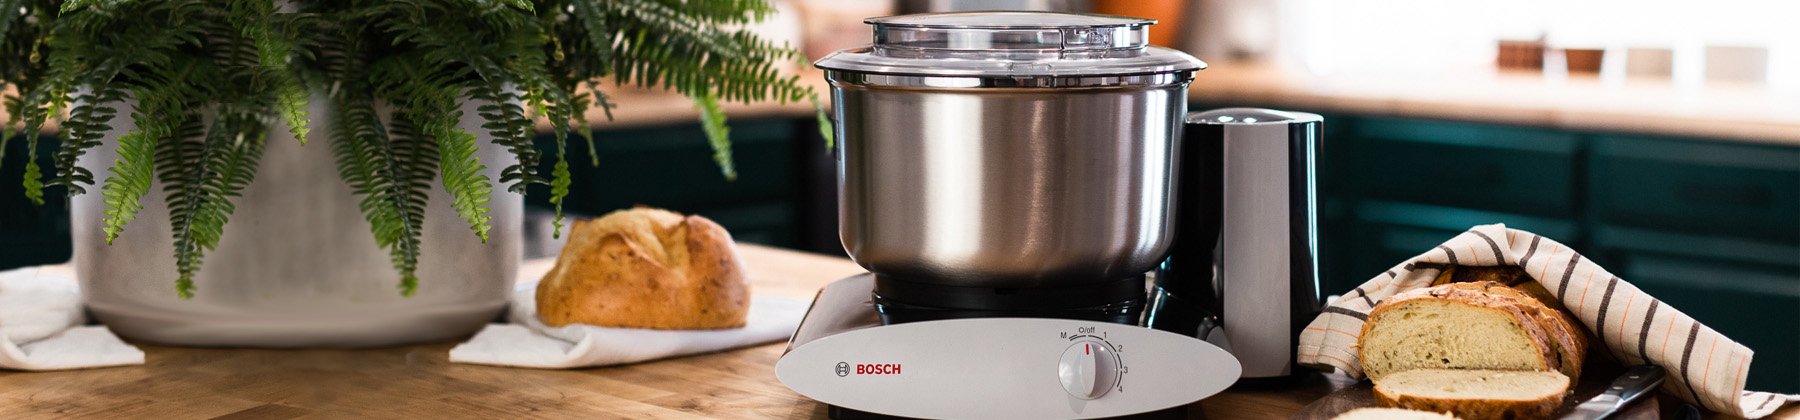 Bosch Mum 6621uc Universal Mixer With Attachments and Bowl Mum6621uc for  sale online